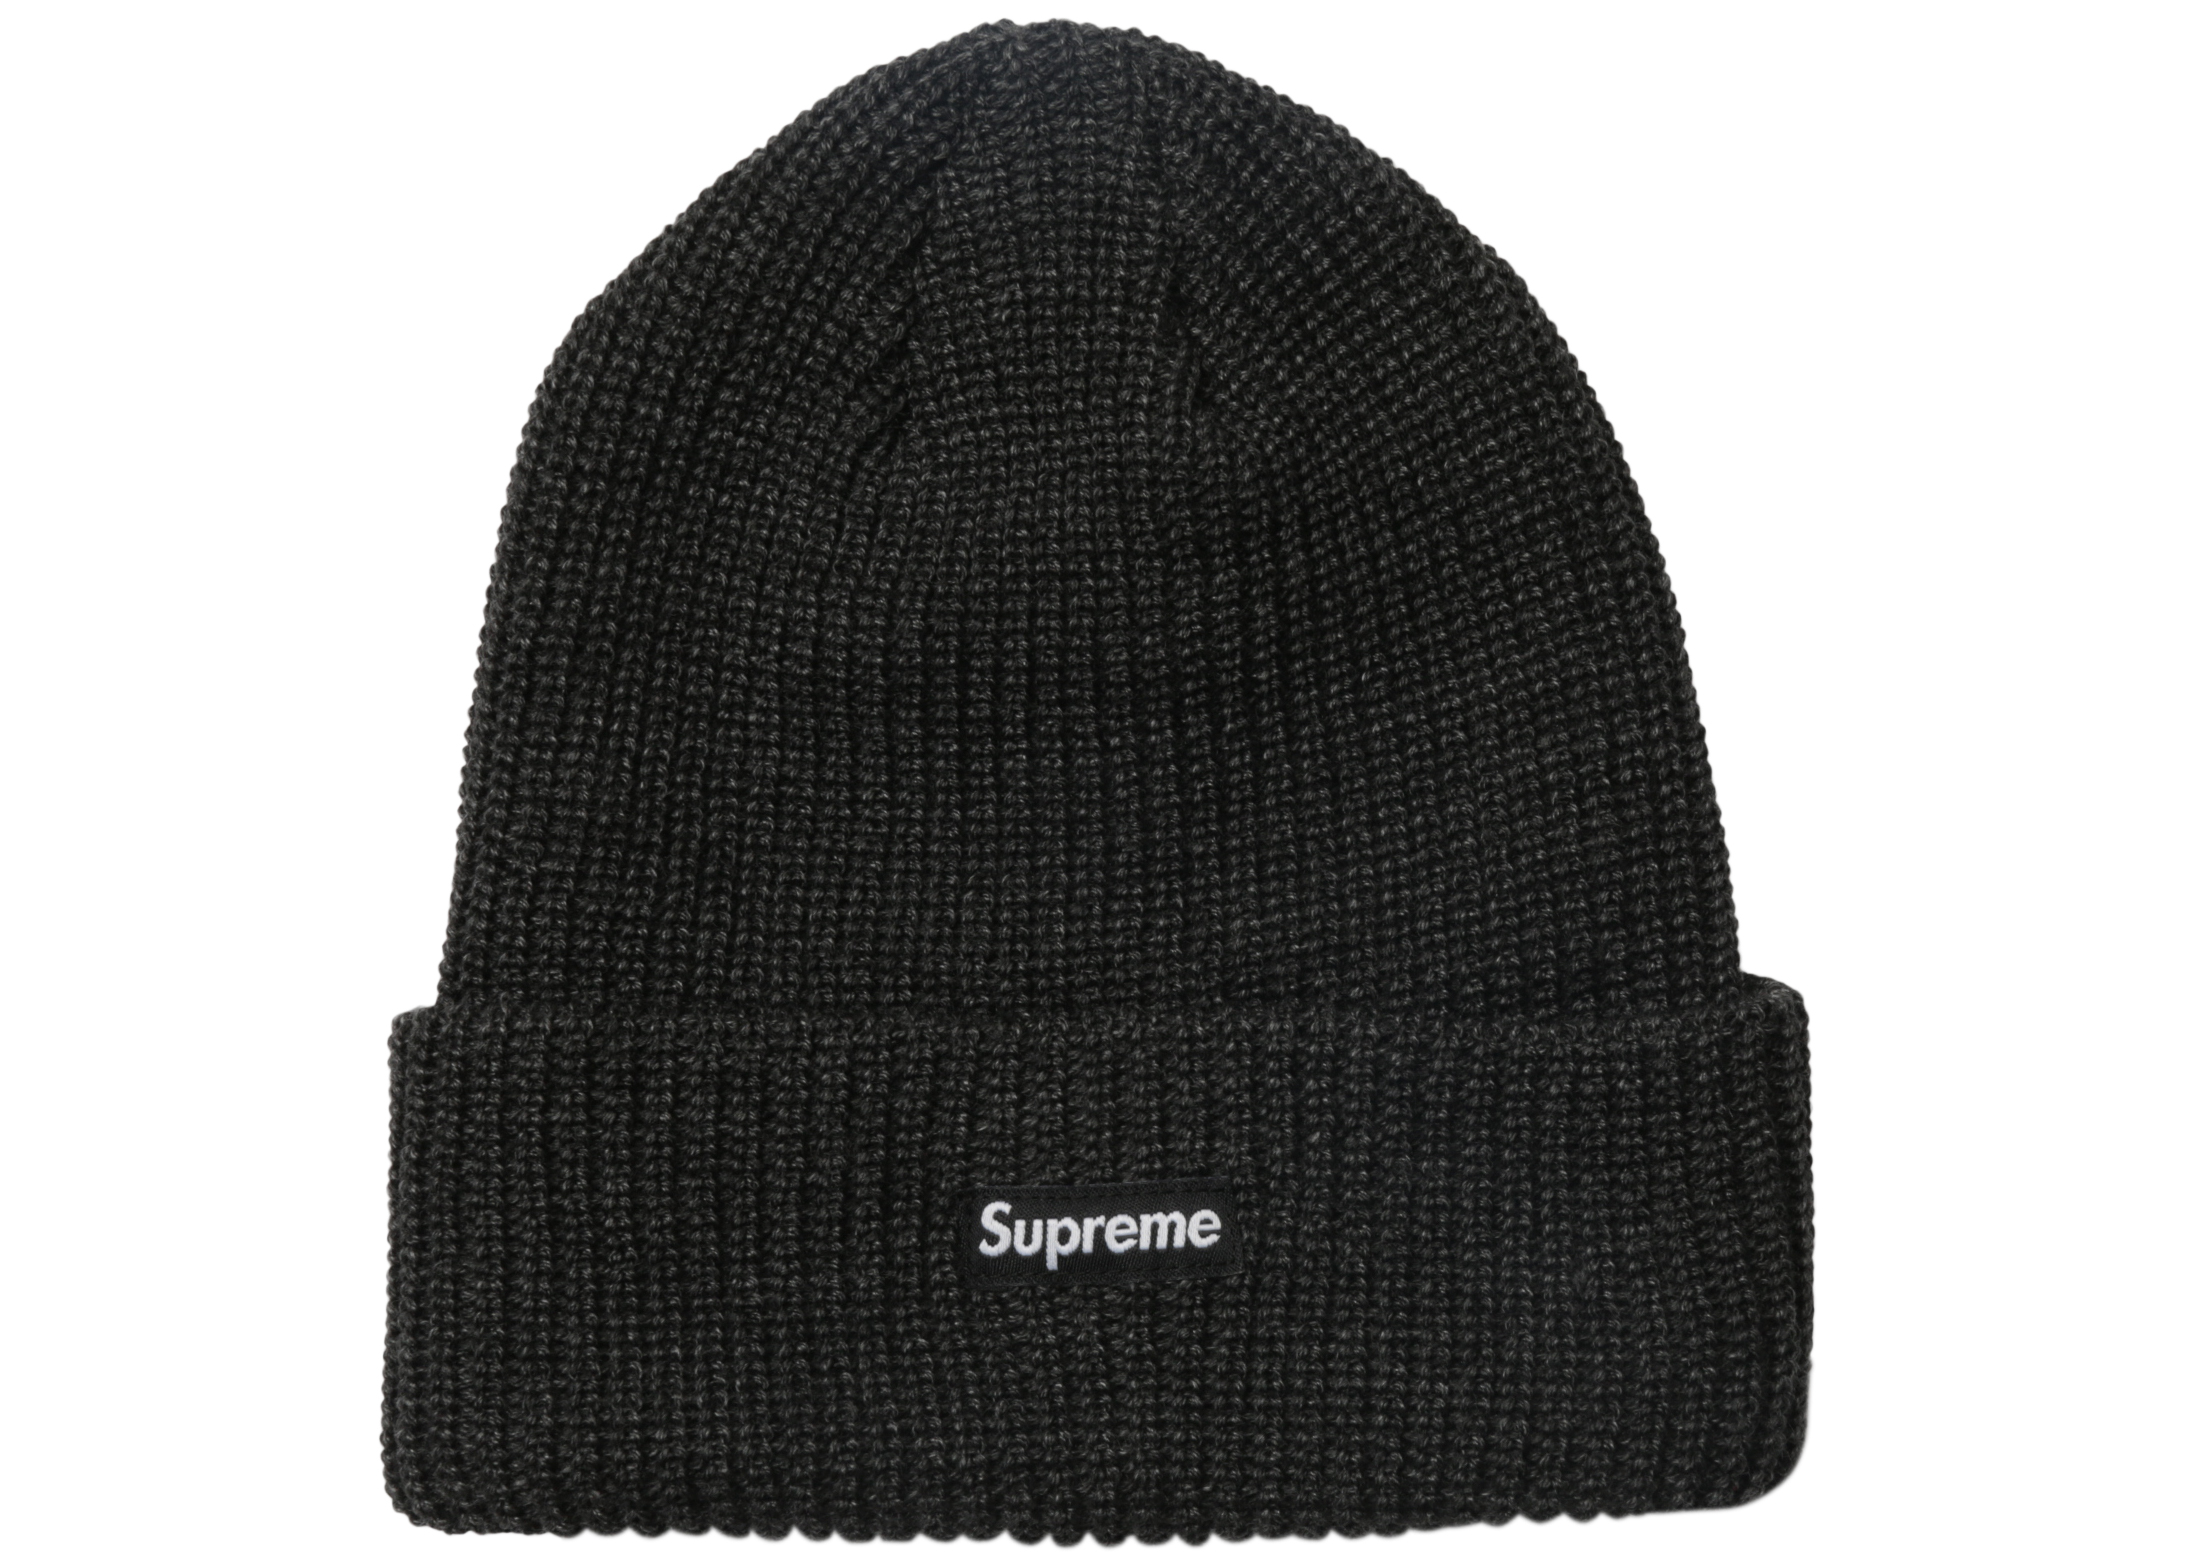 Supreme Loose Gauge Beanie Black - Permanent Collection - GB